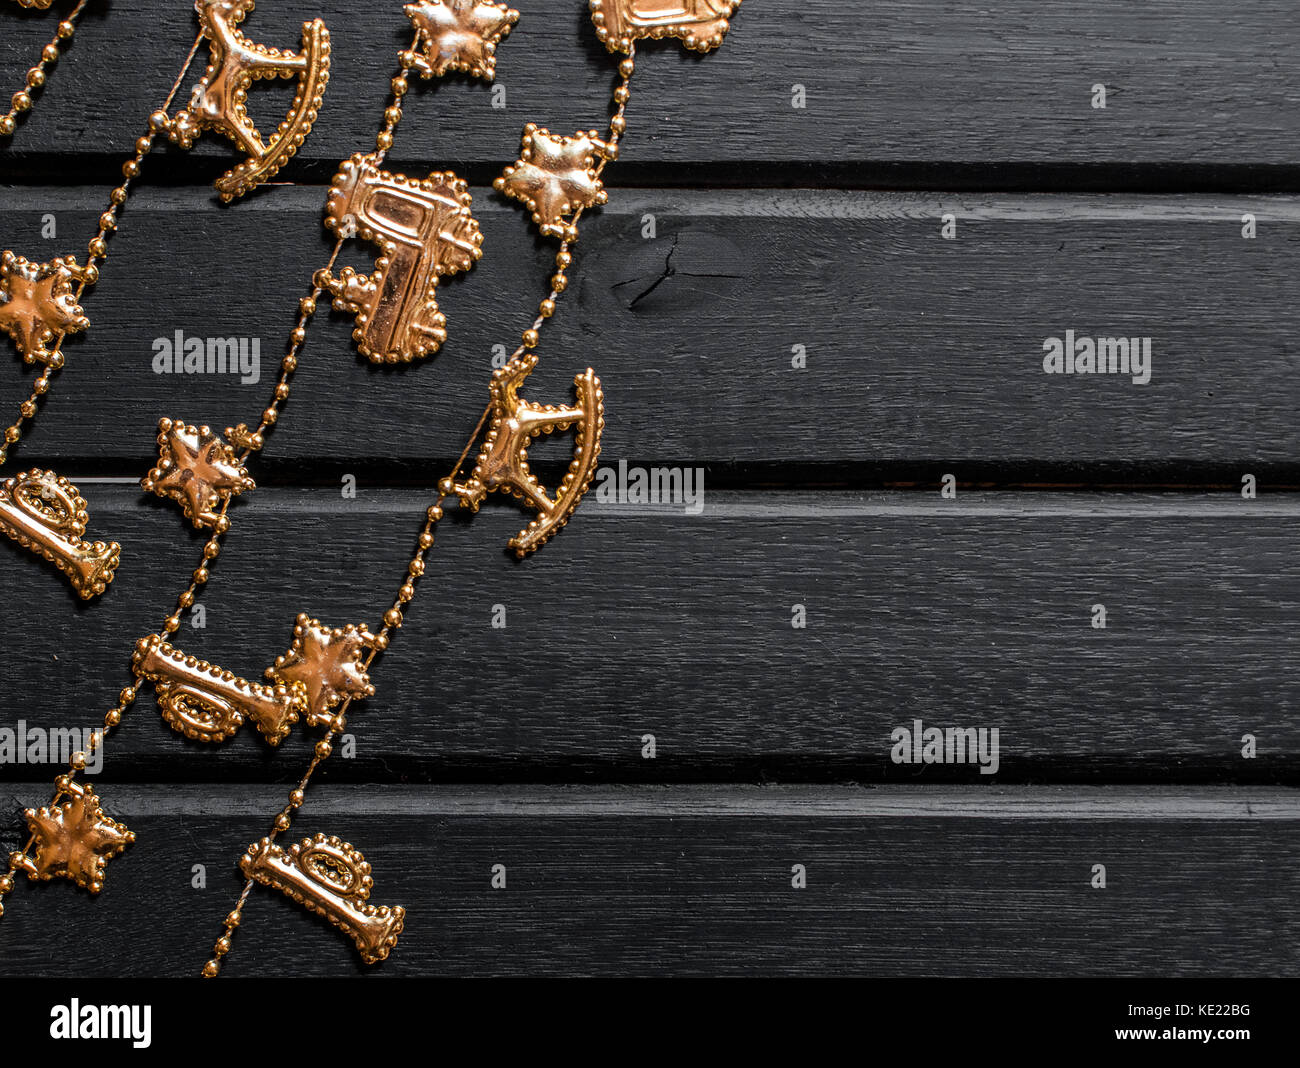 Christmas decoration background, on a black wooden backdrop,with chain showing reindeer, stars, train, trumpet, and christmas decor Stock Photo